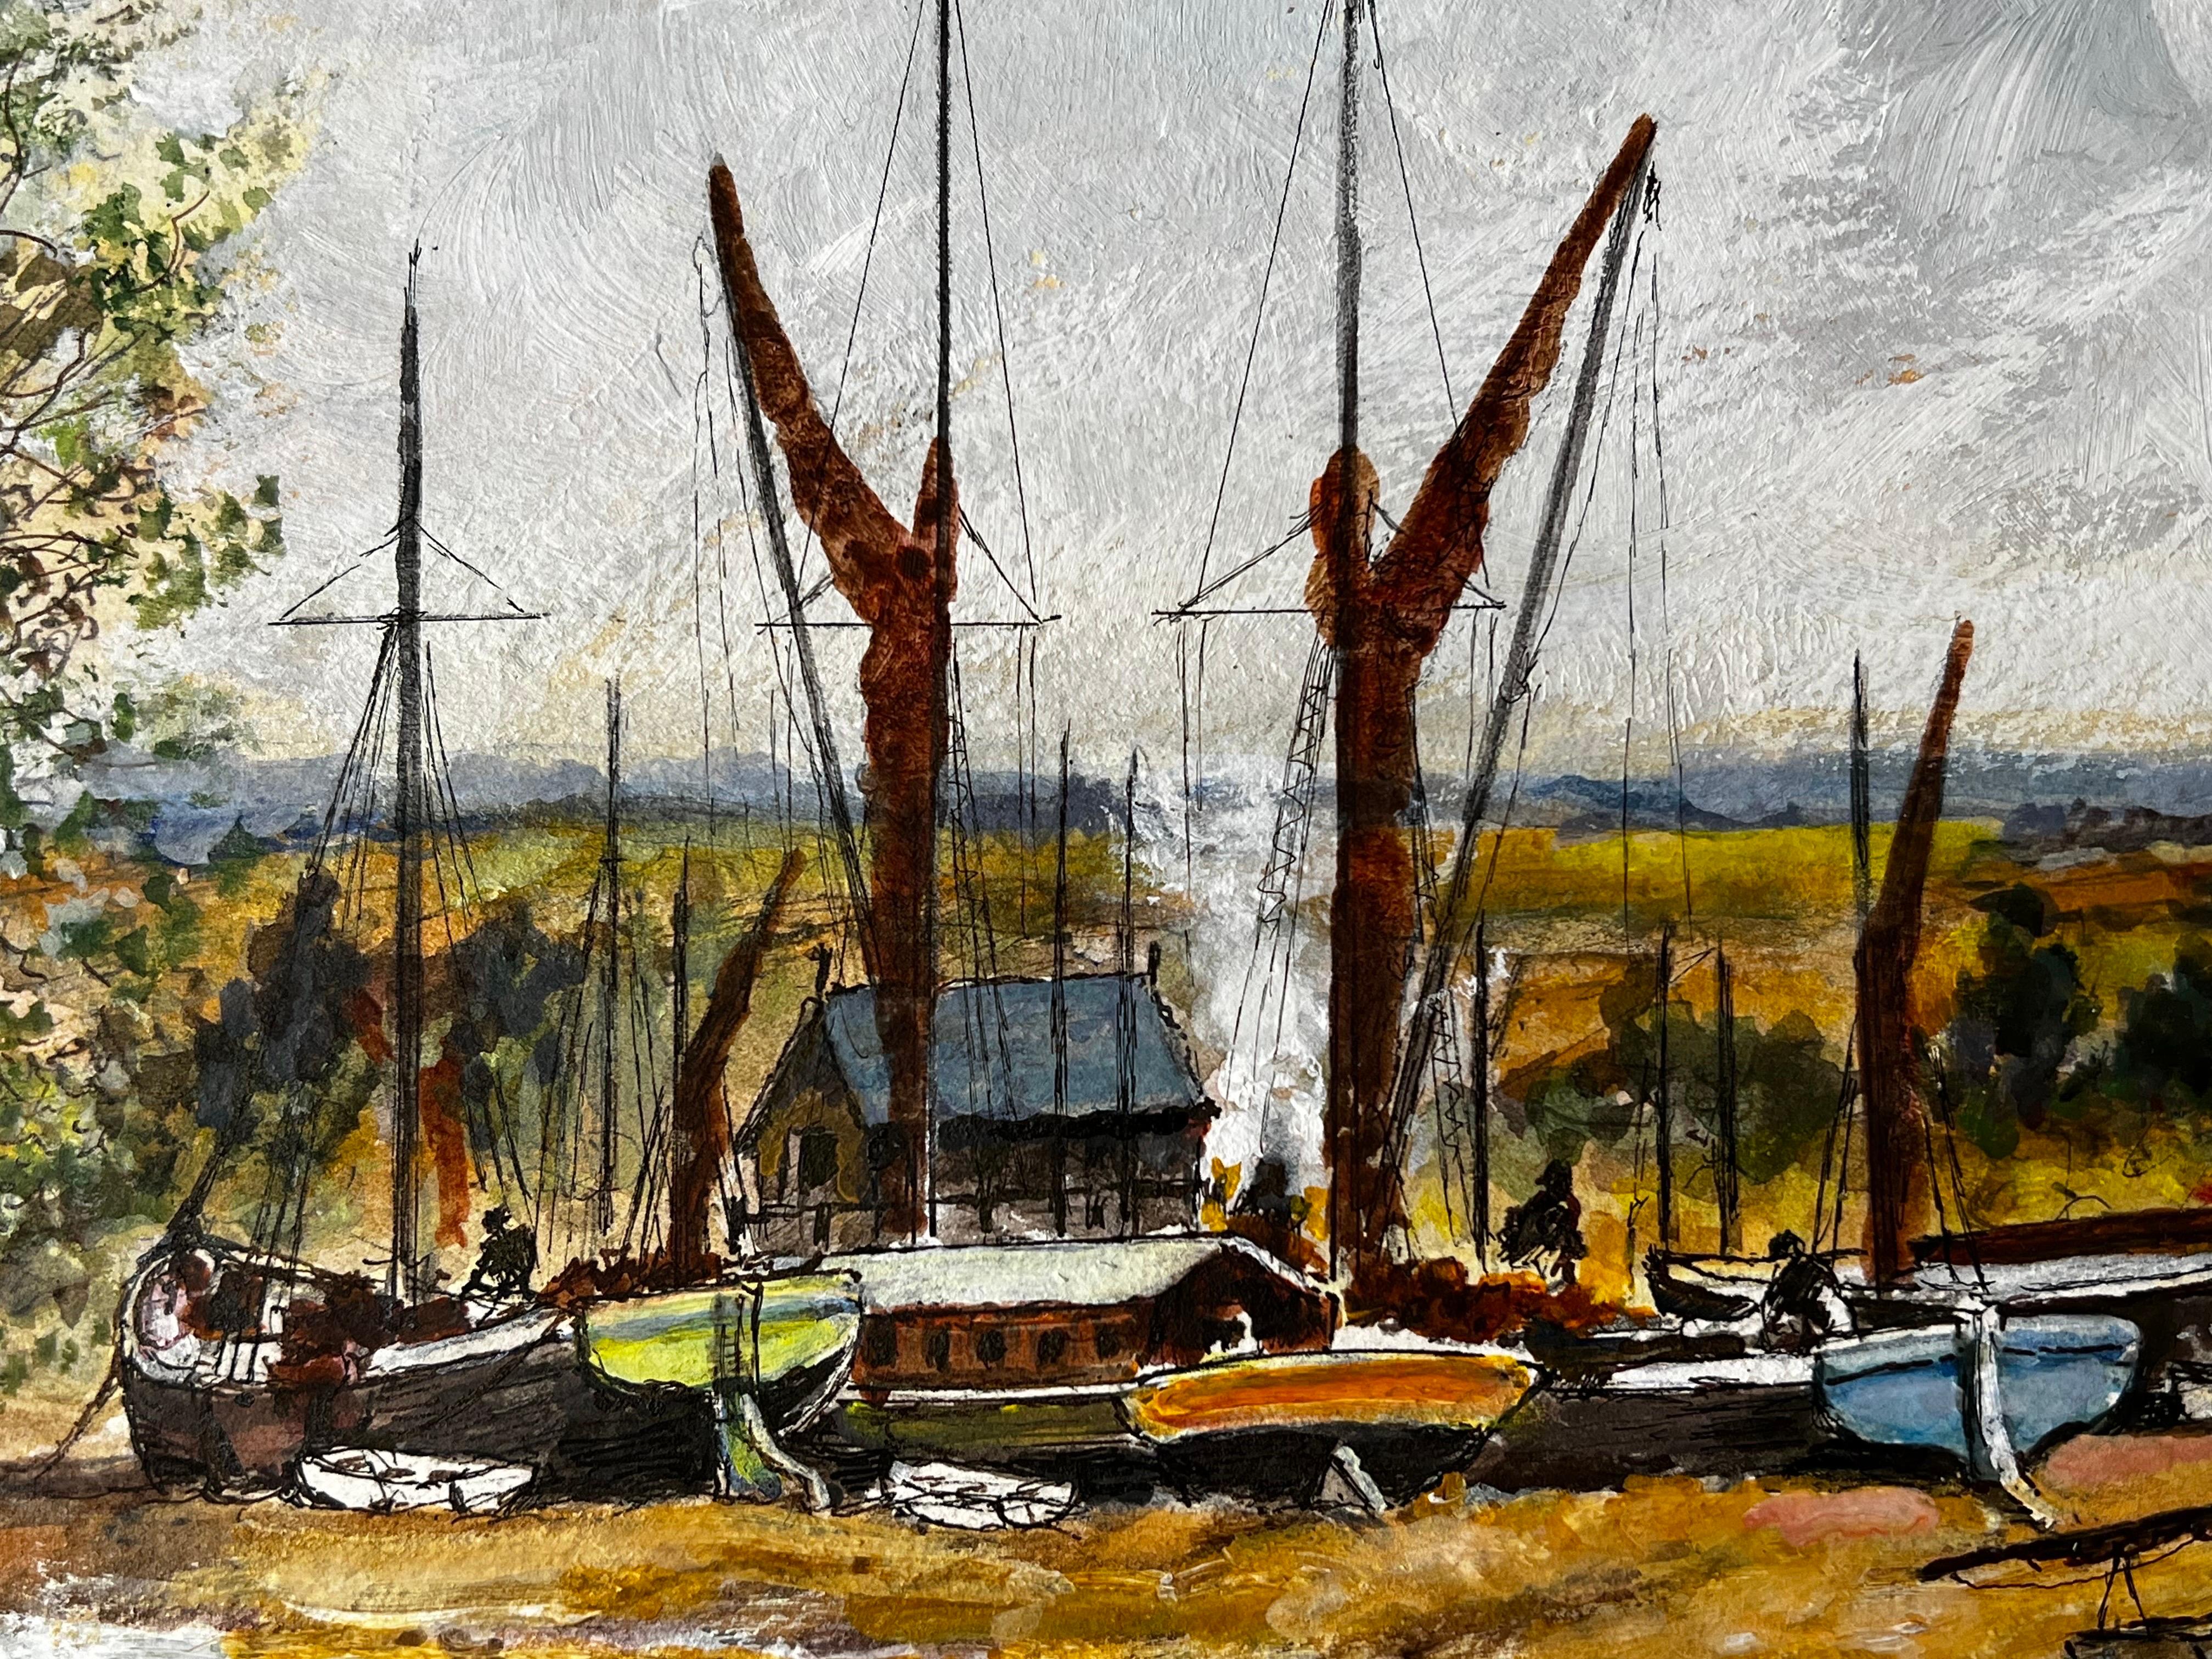 Artist/ School: Norman A.Olley ( British, 20th Century) dated 1992 and inscribed verso

Title - The Boat Repair Yard

Medium: gouache/watercolour/ ink/ pencil on artist paper, unframed 

Painting : 12 x 16 inches

Provenance: all the paintings we